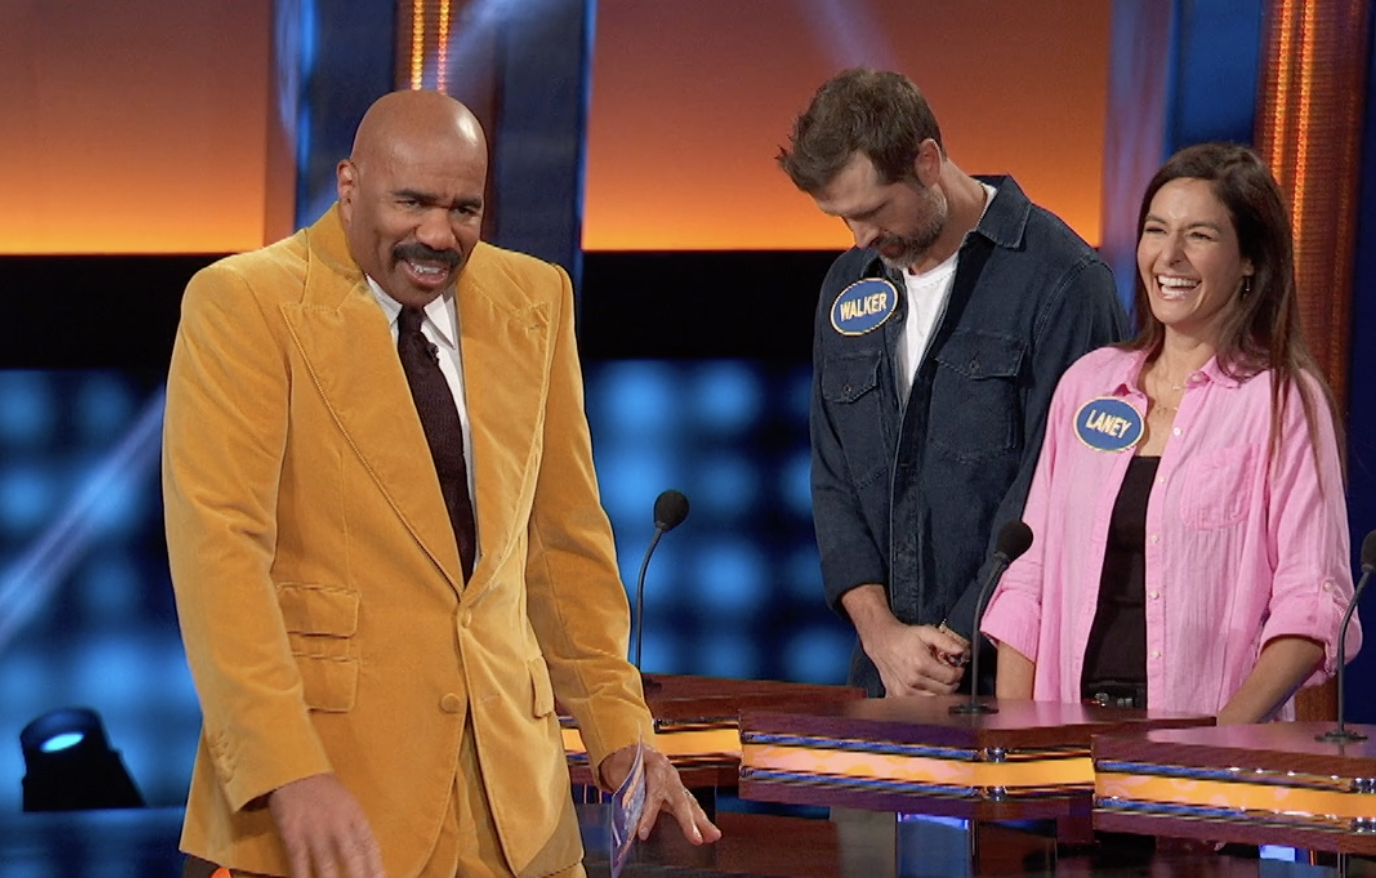 'Celebrity Family Feud' Exclusive Preview: Steve Harvey And Team Walker Hayes Answer This Question About Him